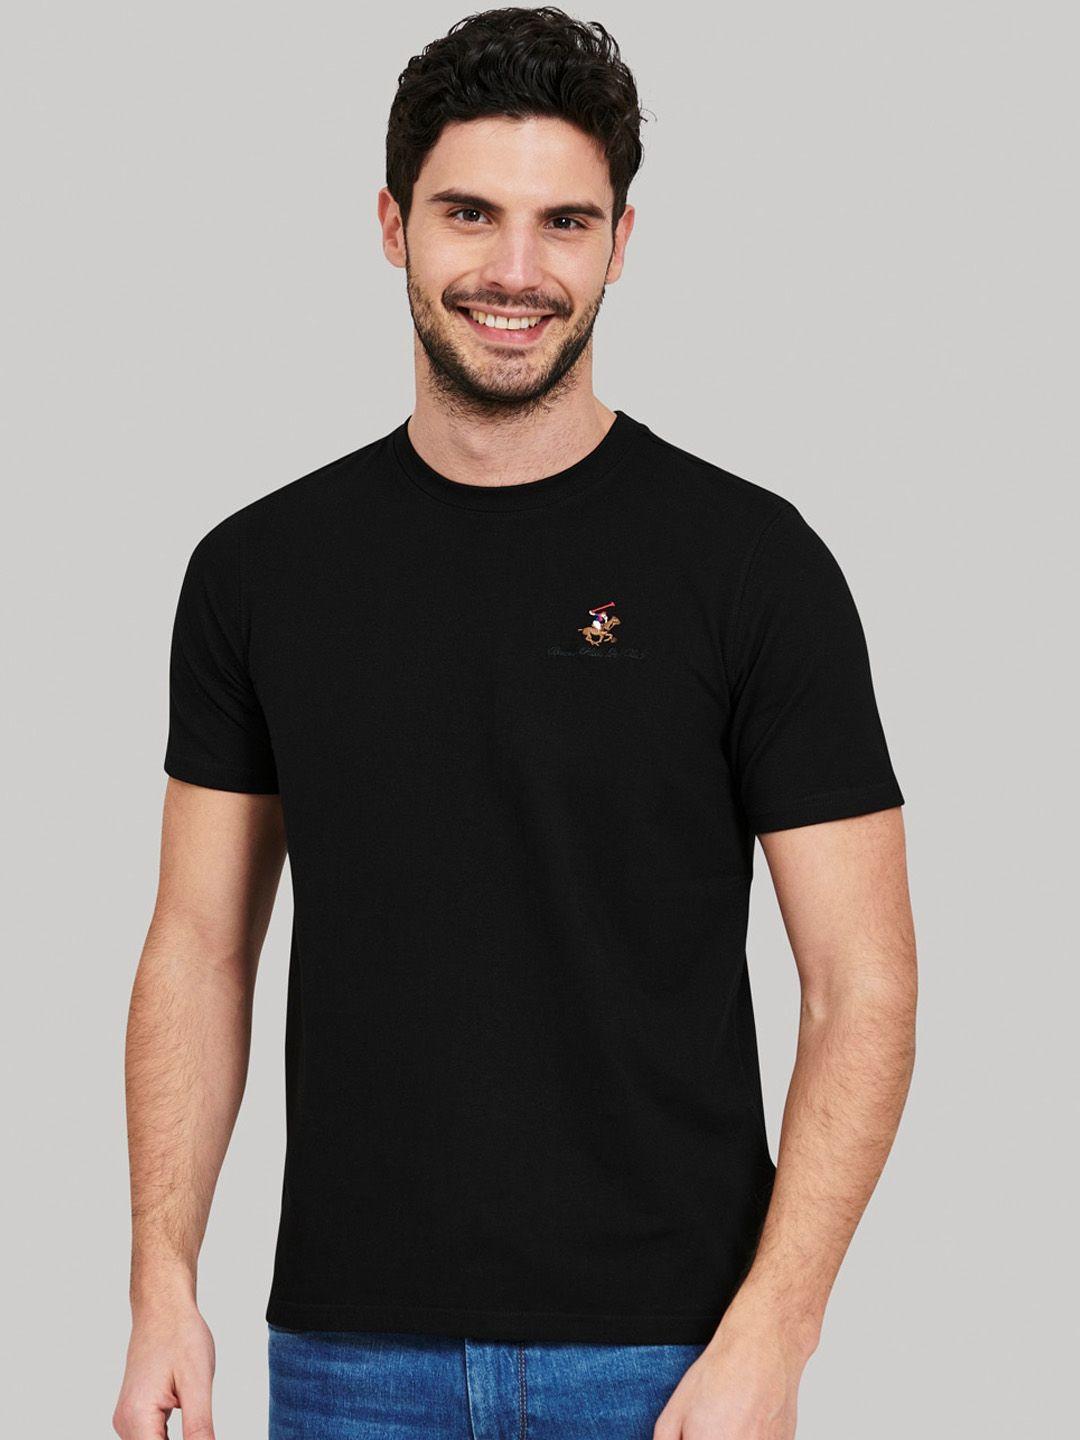 beverly hills polo club men black solid round neck t-shirt